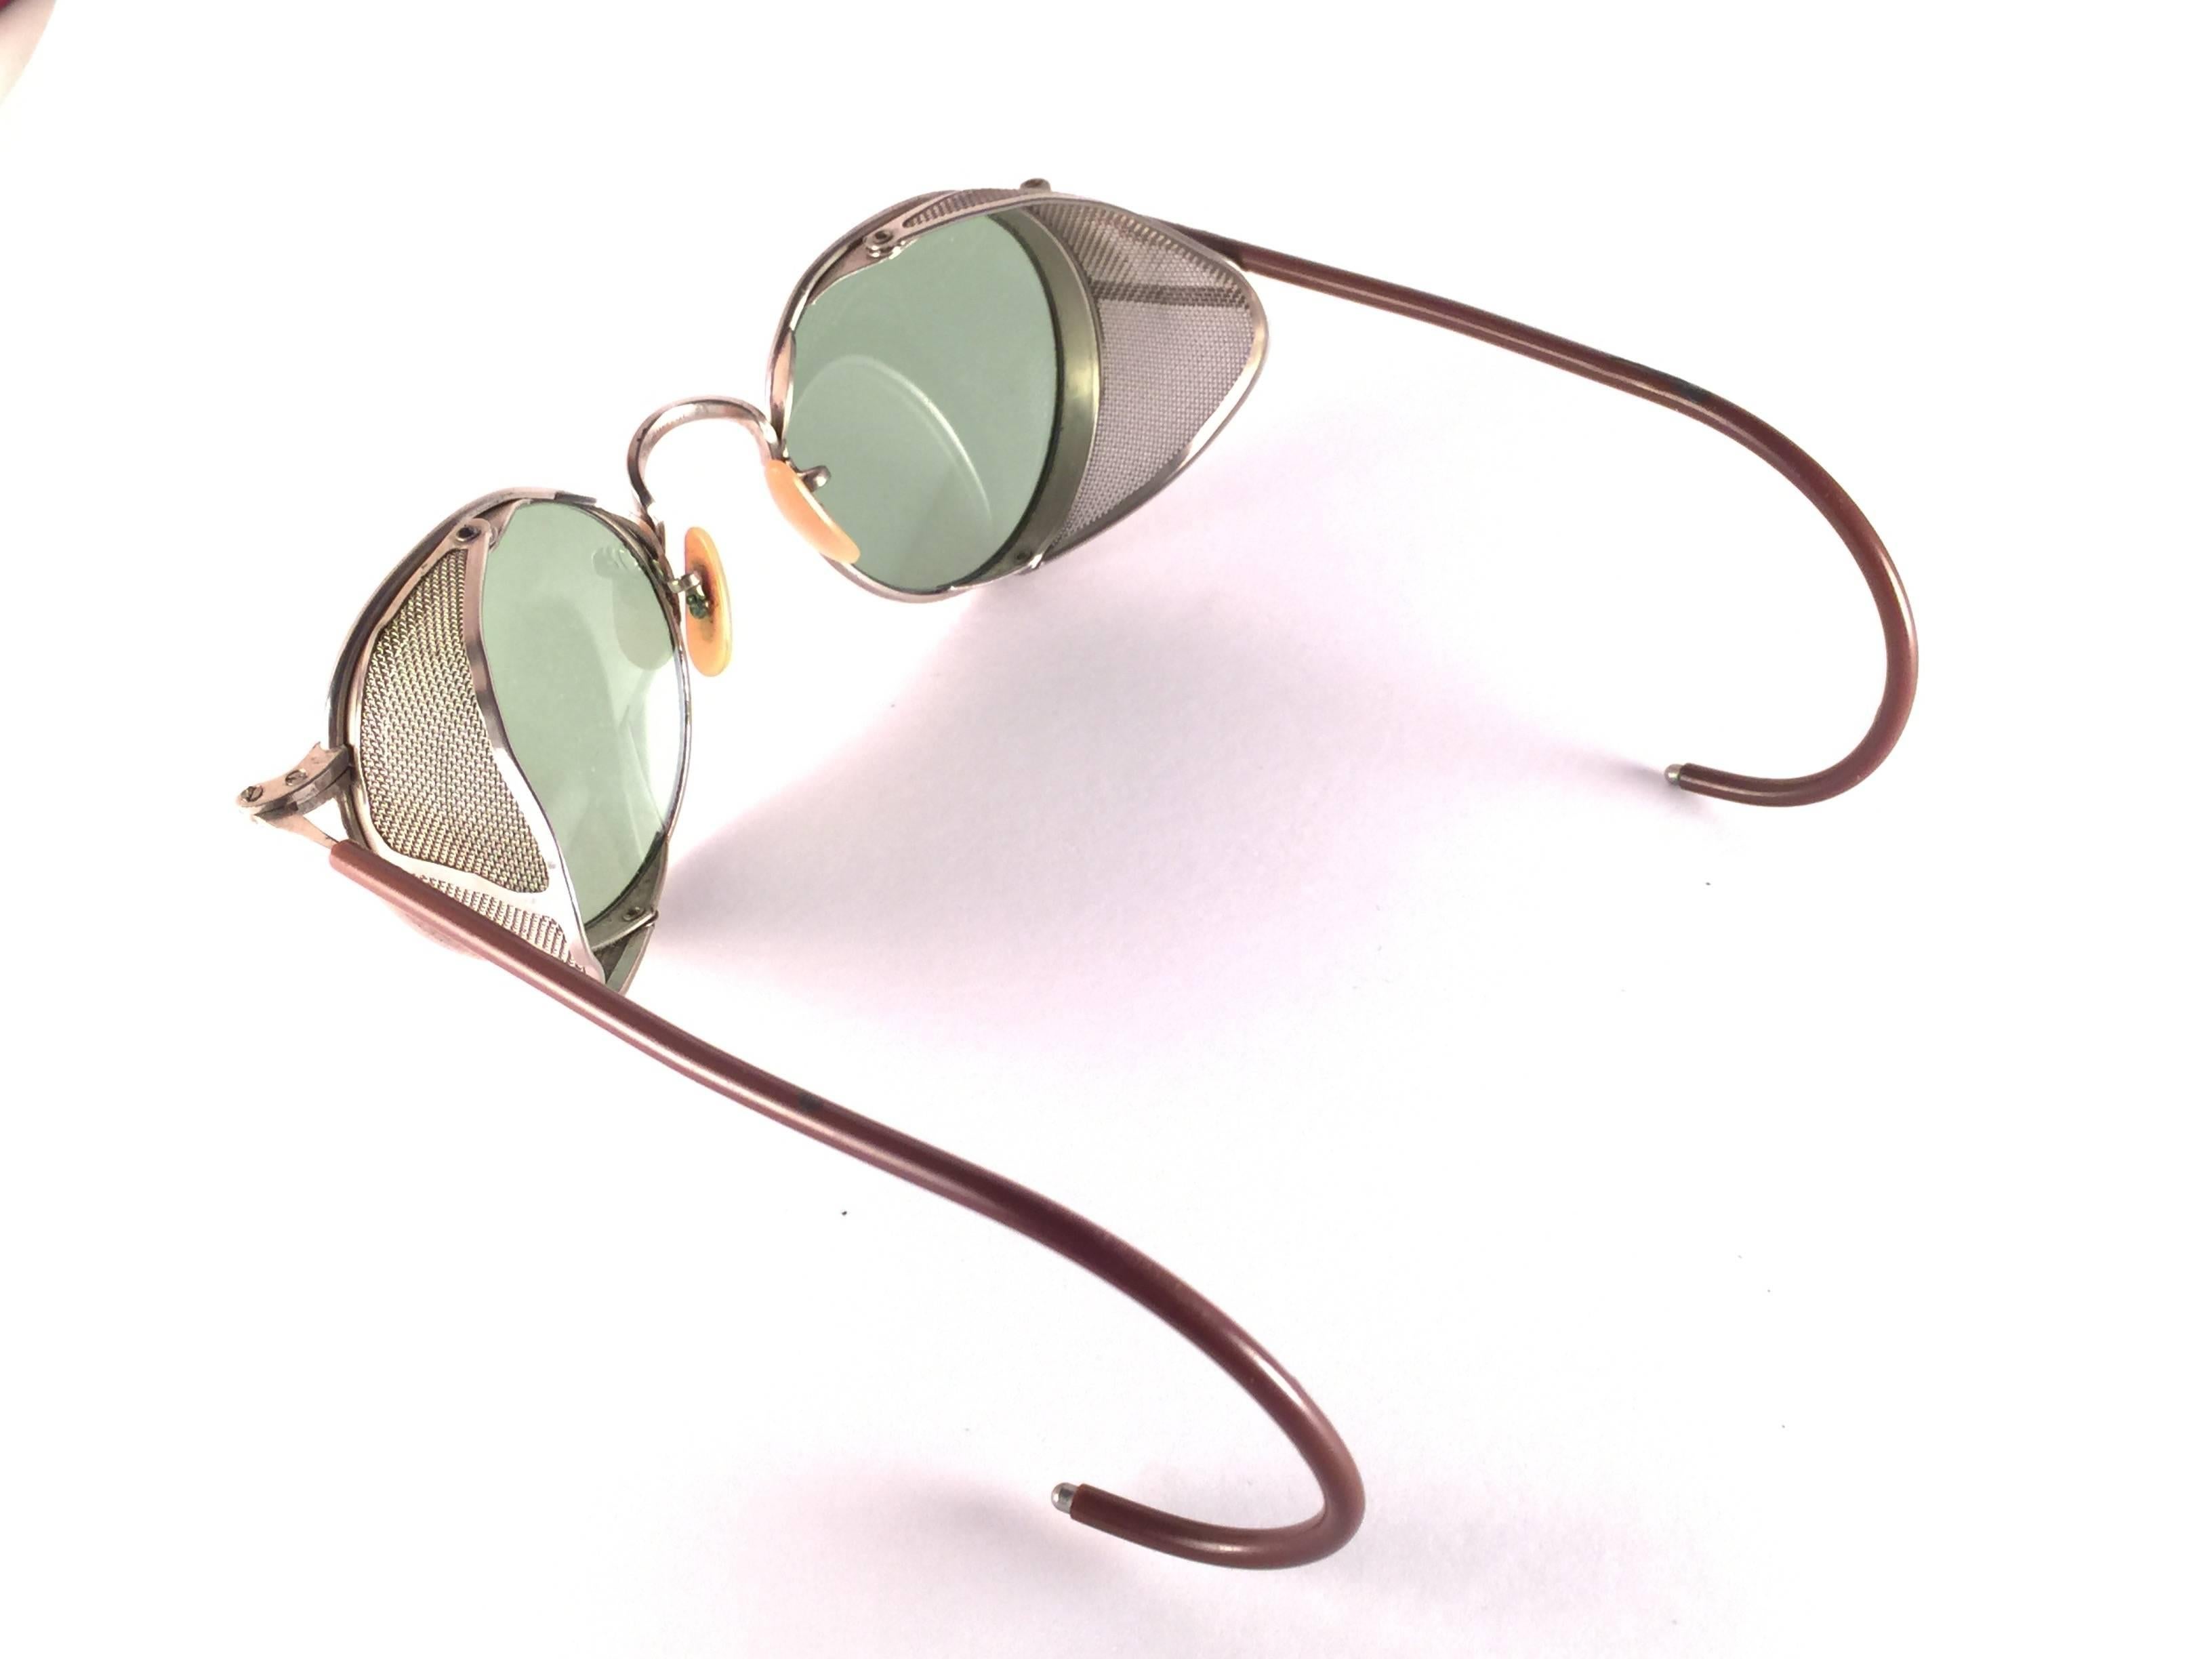 Gray Mint Vintage Bausch & Lomb Goggles Steampunk 1950's Collectors Item Sunglasses